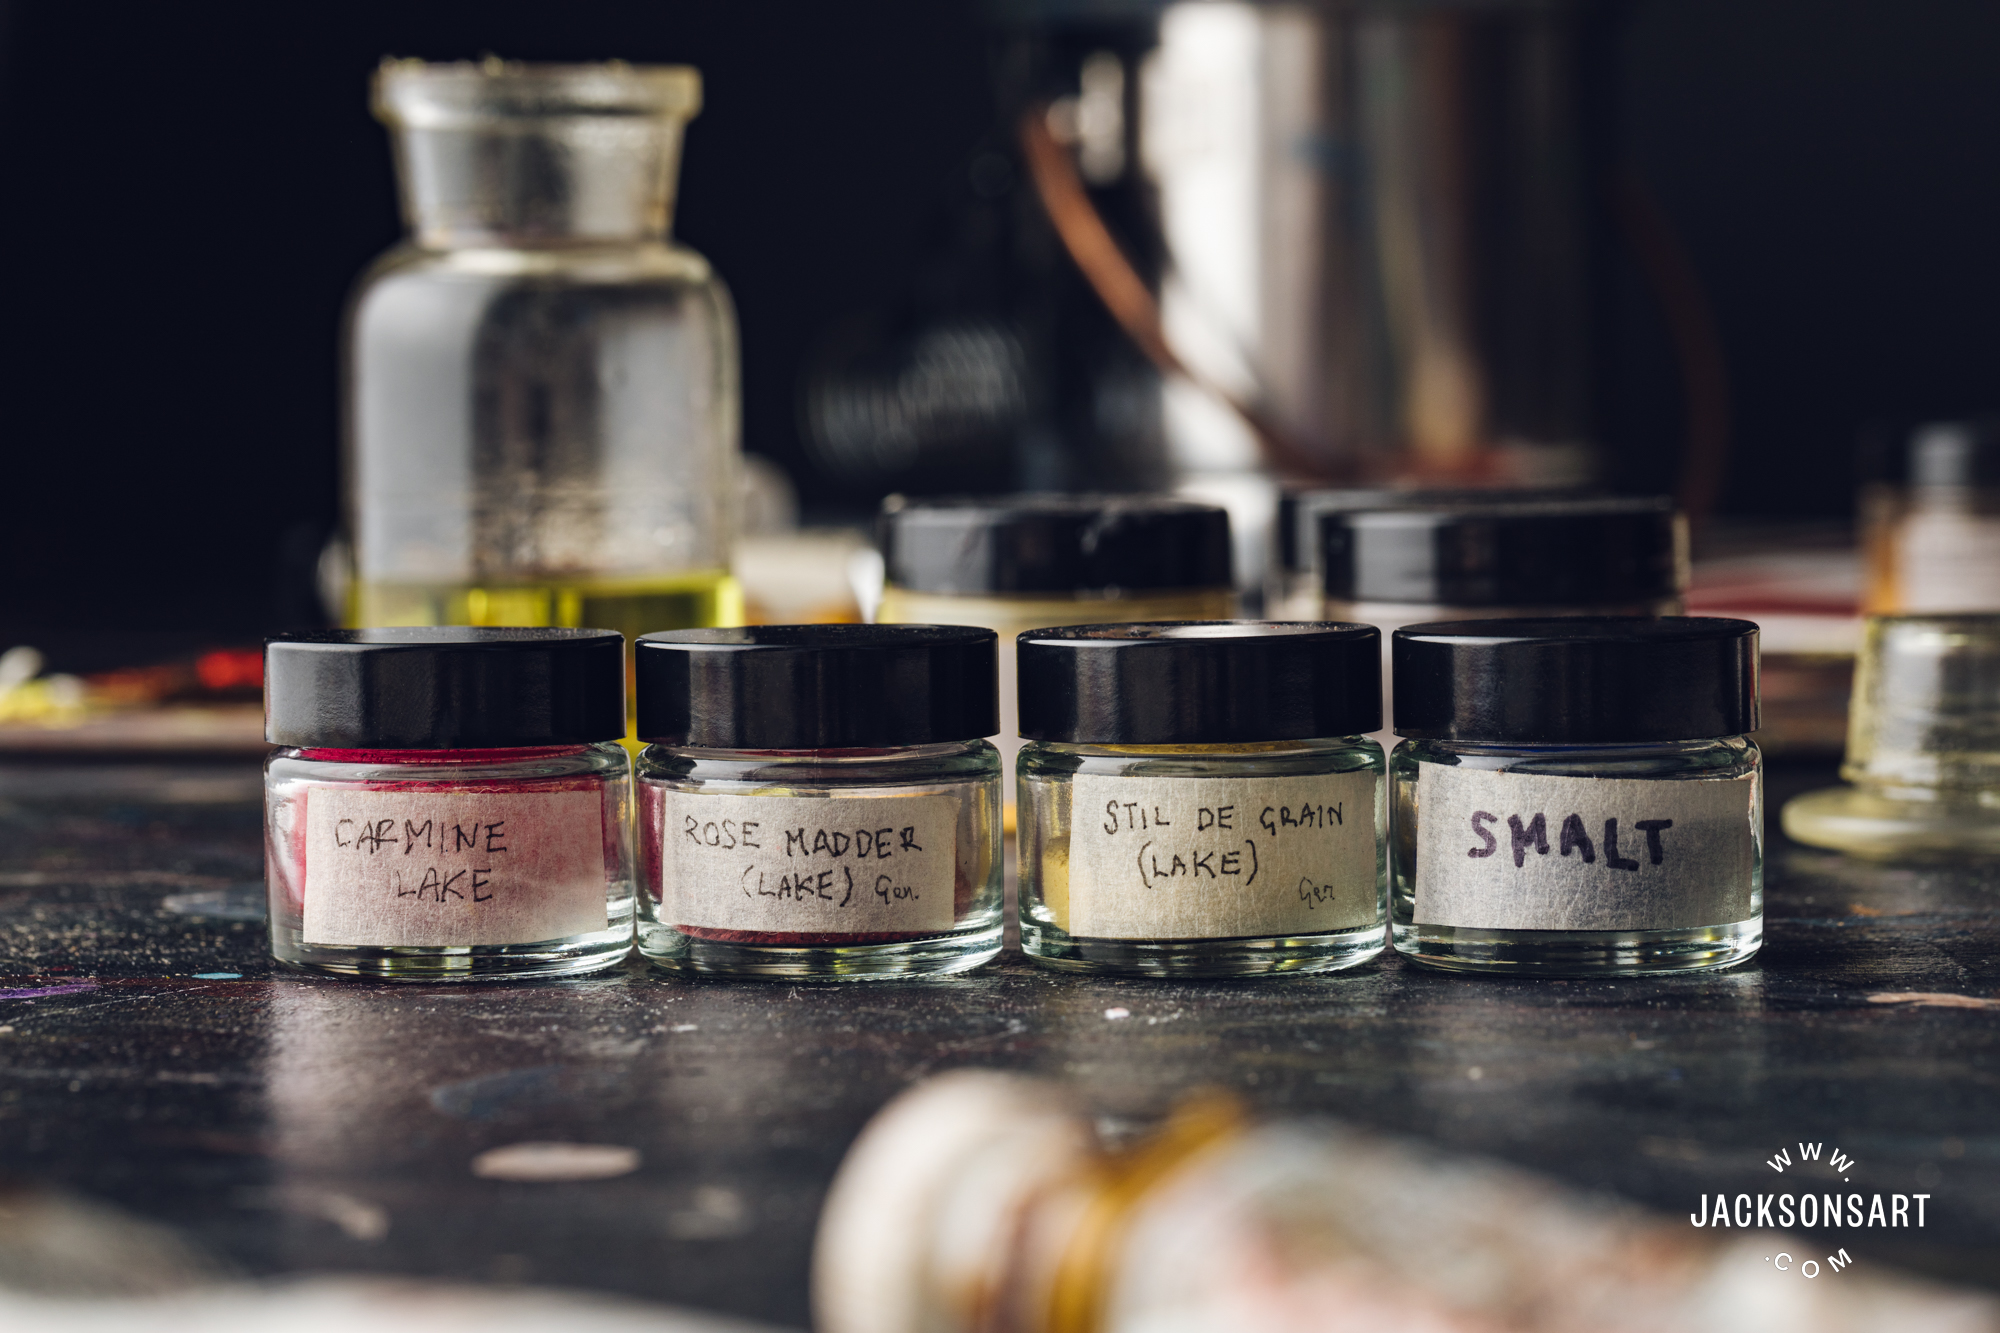 Pigments like those that Rembrandt would have used